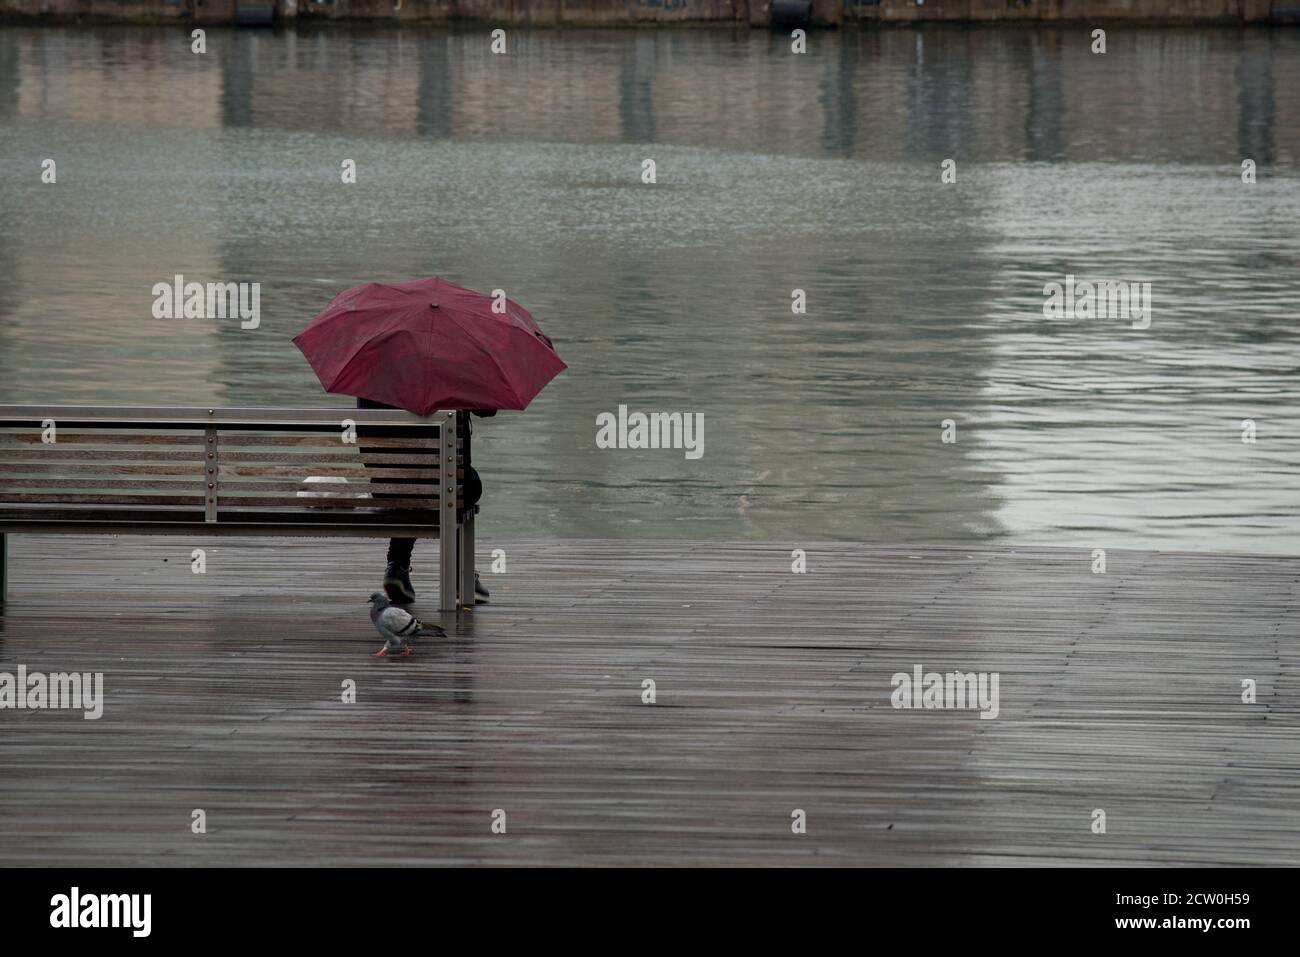 Unrecognizable woman with red umbrella sitting on a wooden bench in the rain Stock Photo